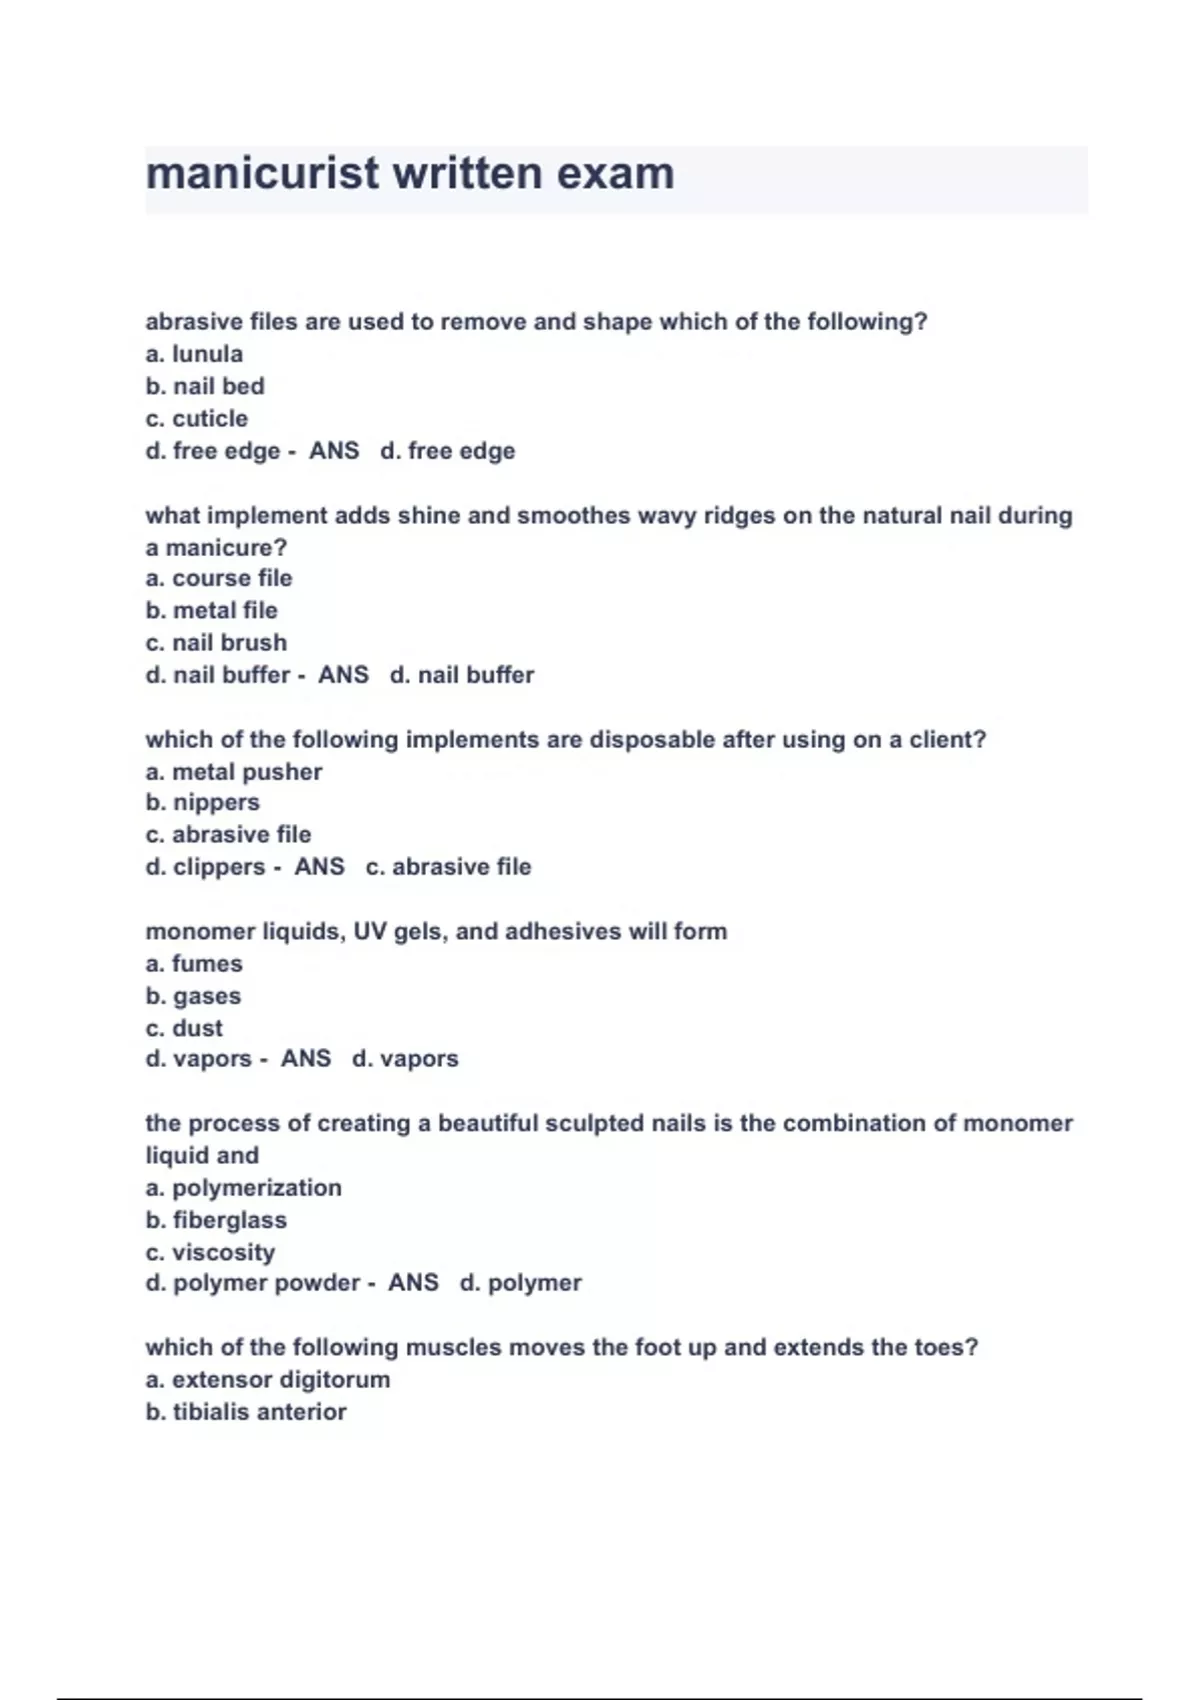 manicurist written Exam Questions And Answers Stuvia US